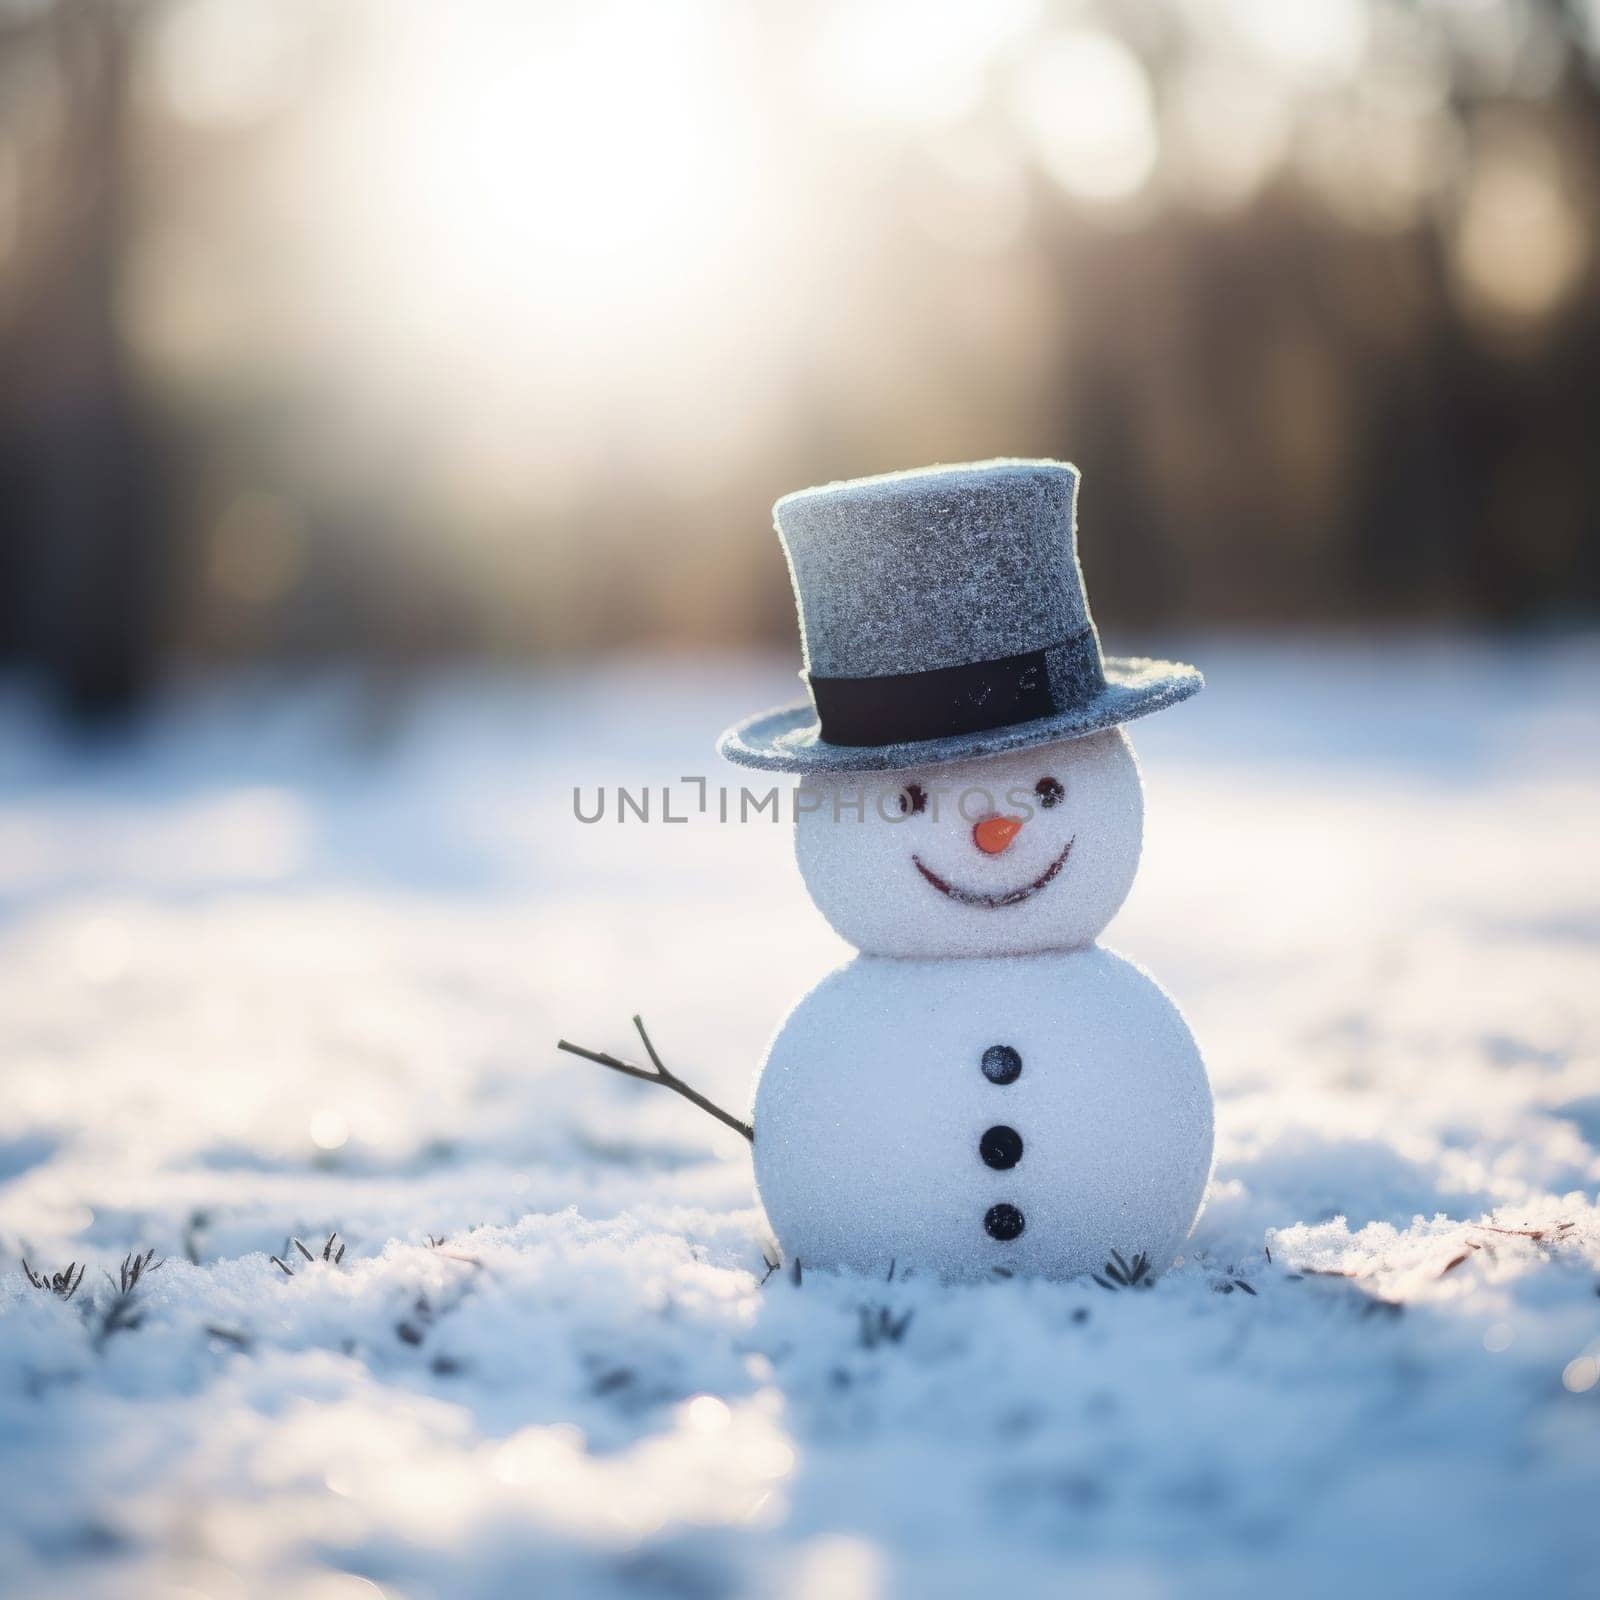 A snowman wearing a hat and a scarf